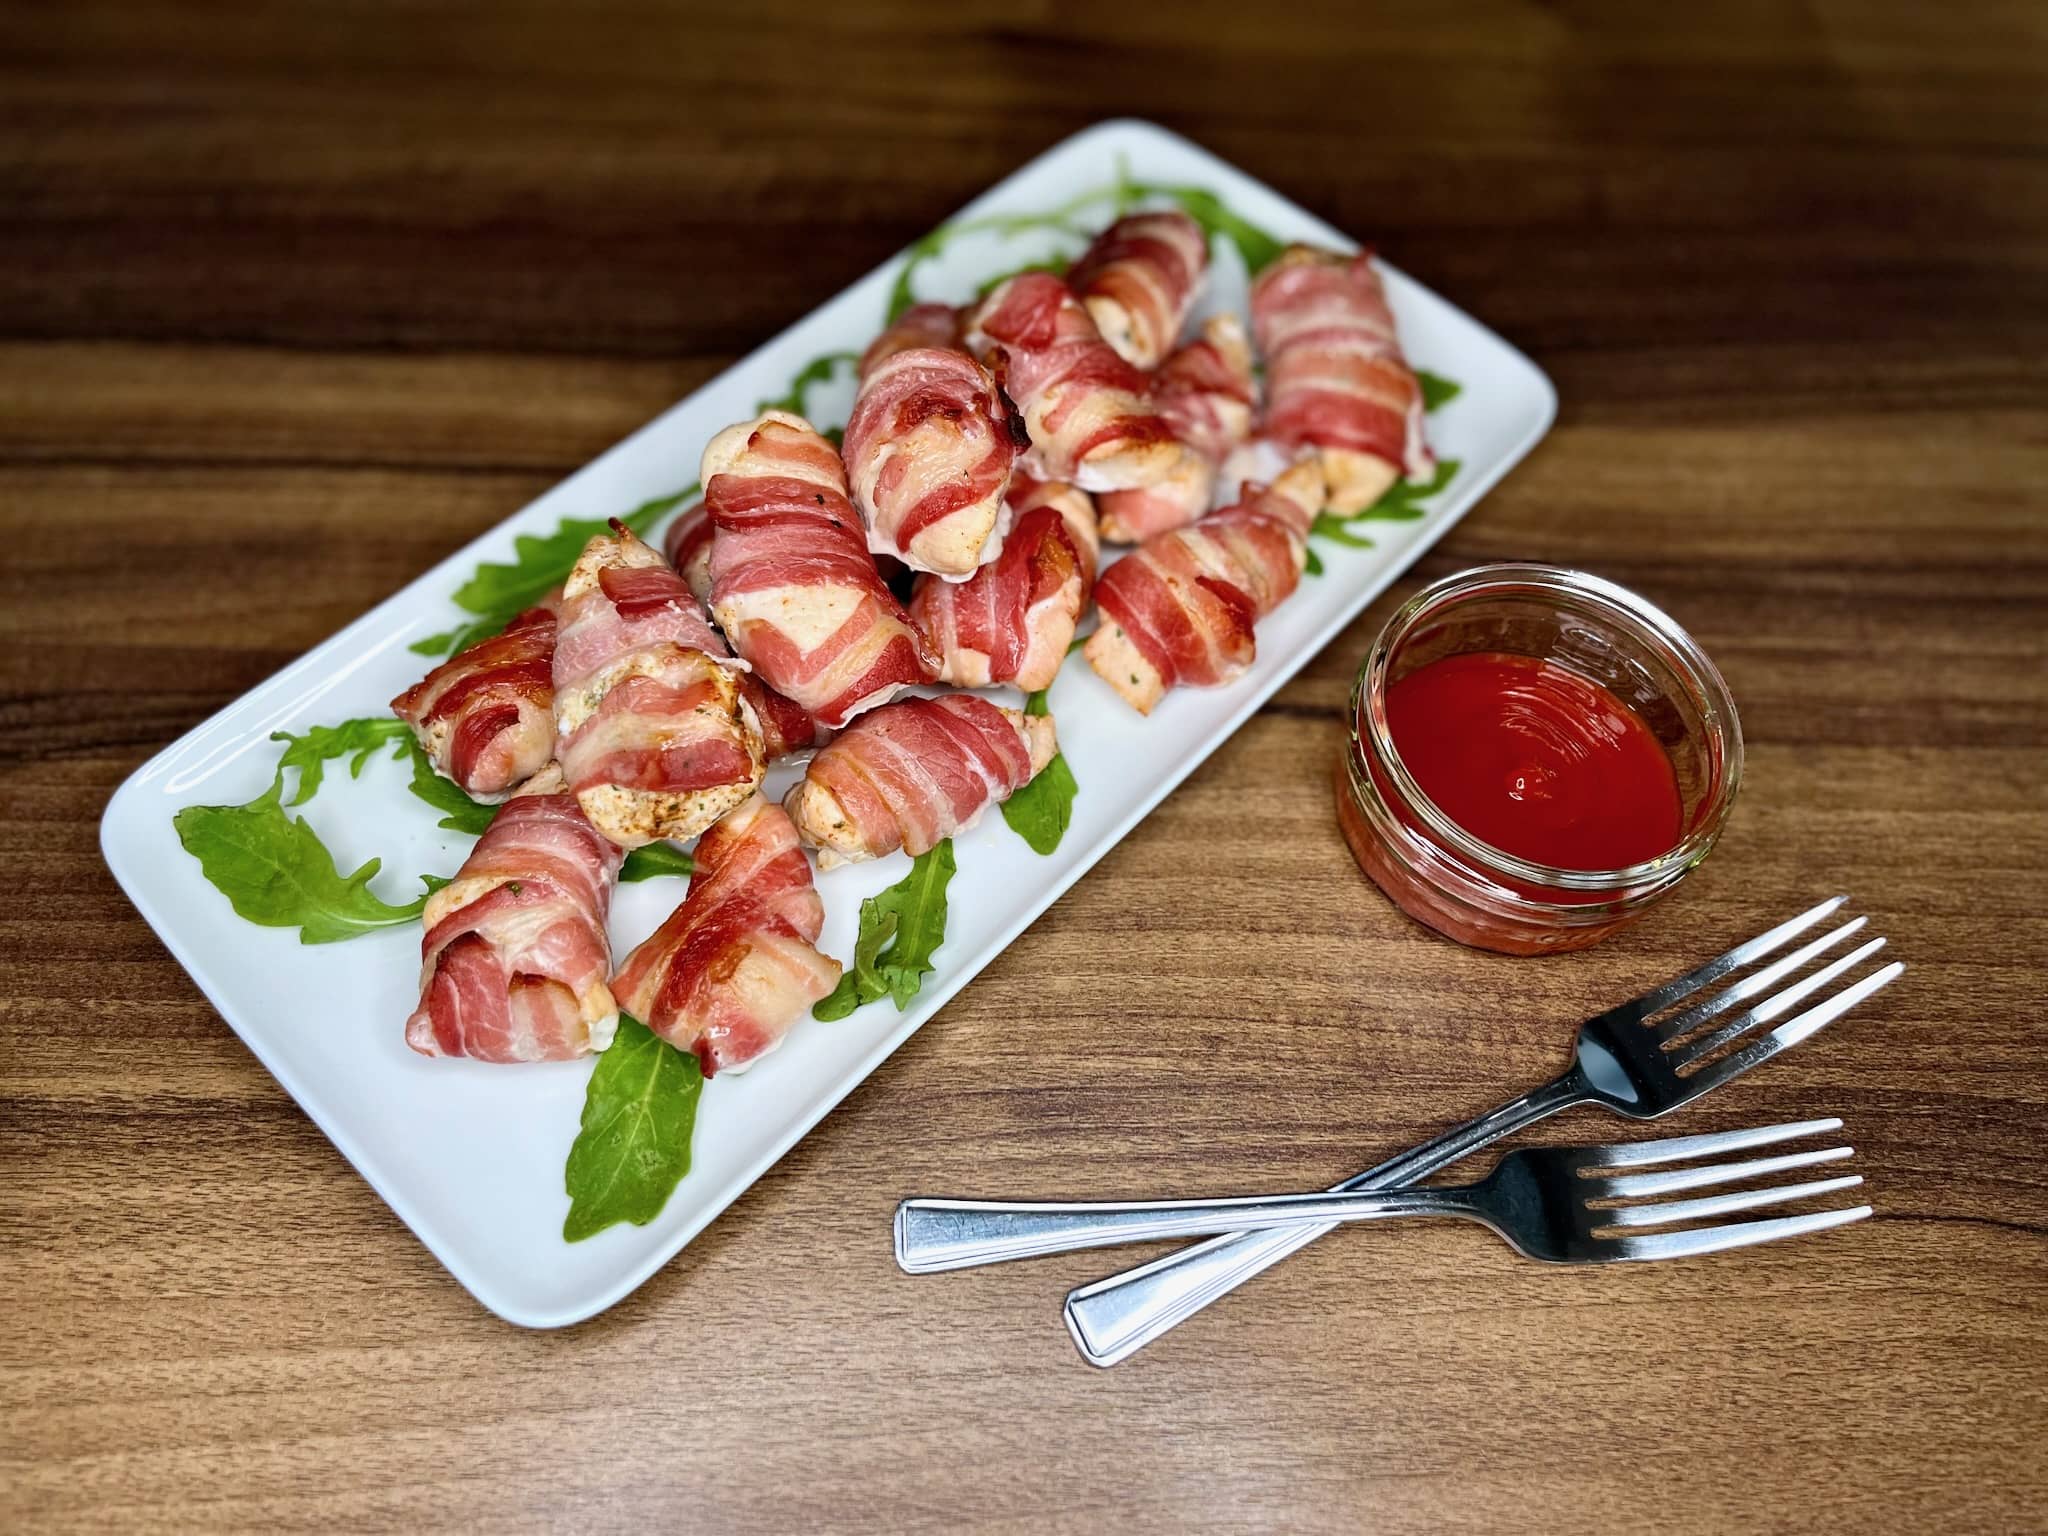 A platter of enticing Bacon-Wrapped Chicken Bites invites guests to indulge